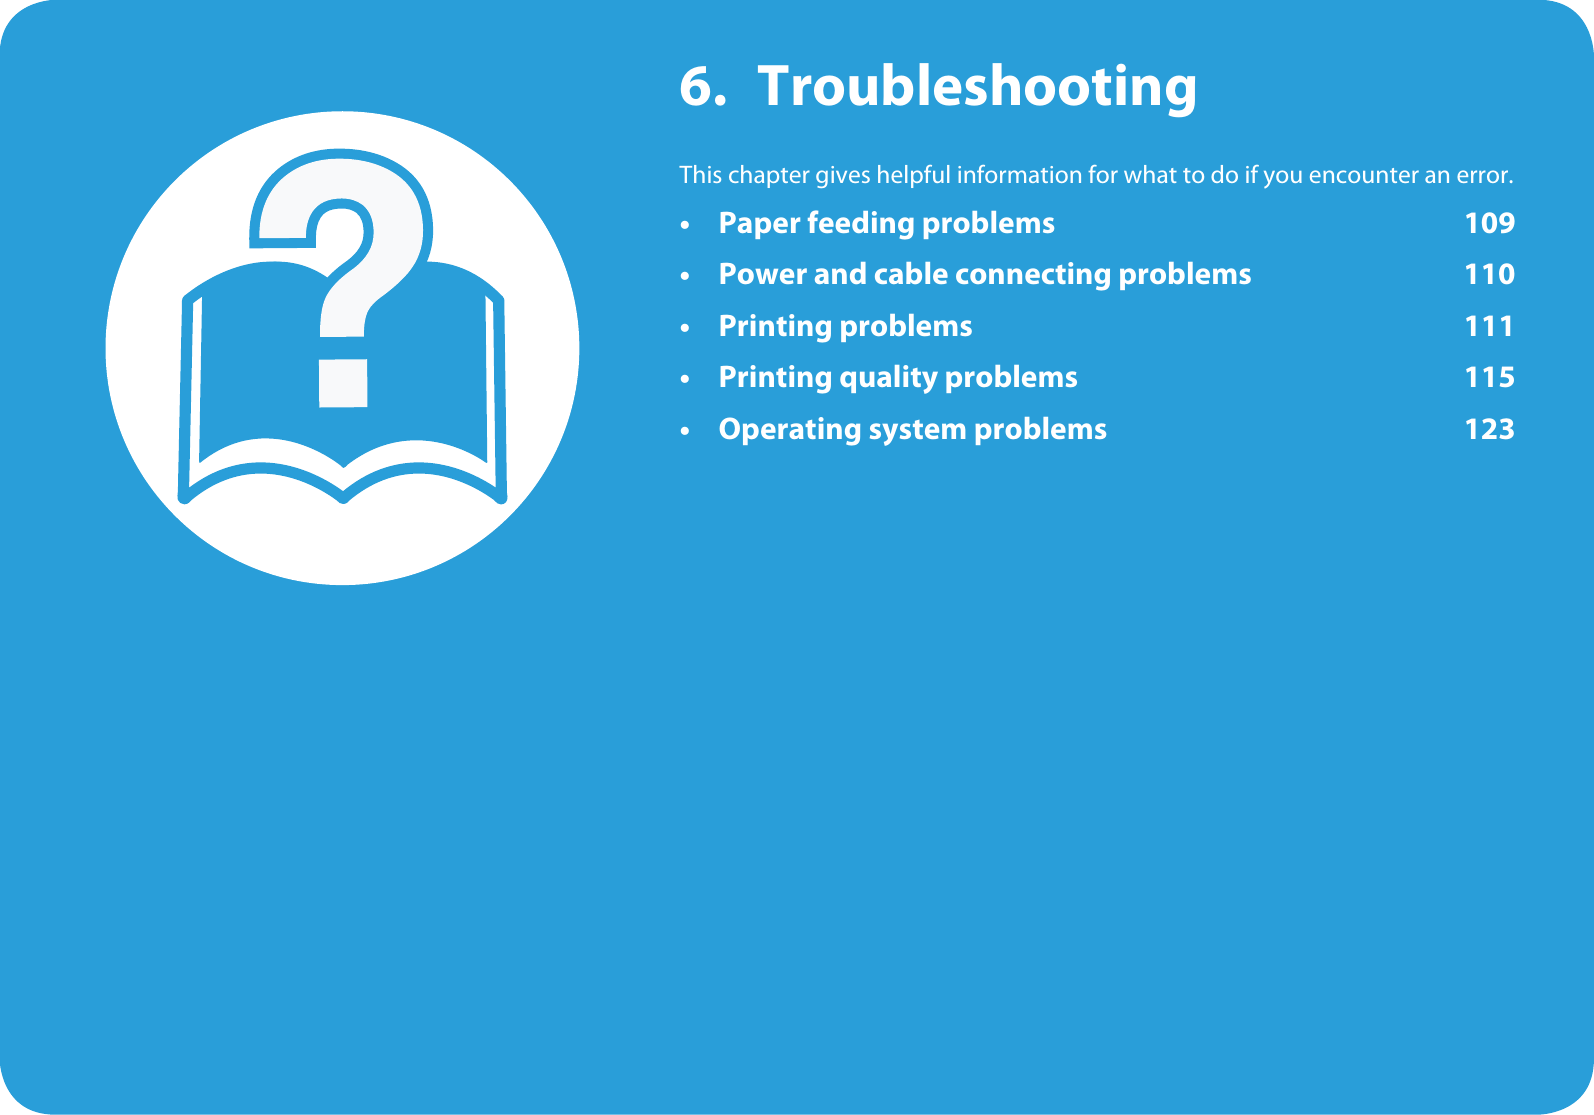 6. TroubleshootingThis chapter gives helpful information for what to do if you encounter an error.• Paper feeding problems 109• Power and cable connecting problems 110• Printing problems 111• Printing quality problems 115• Operating system problems 123